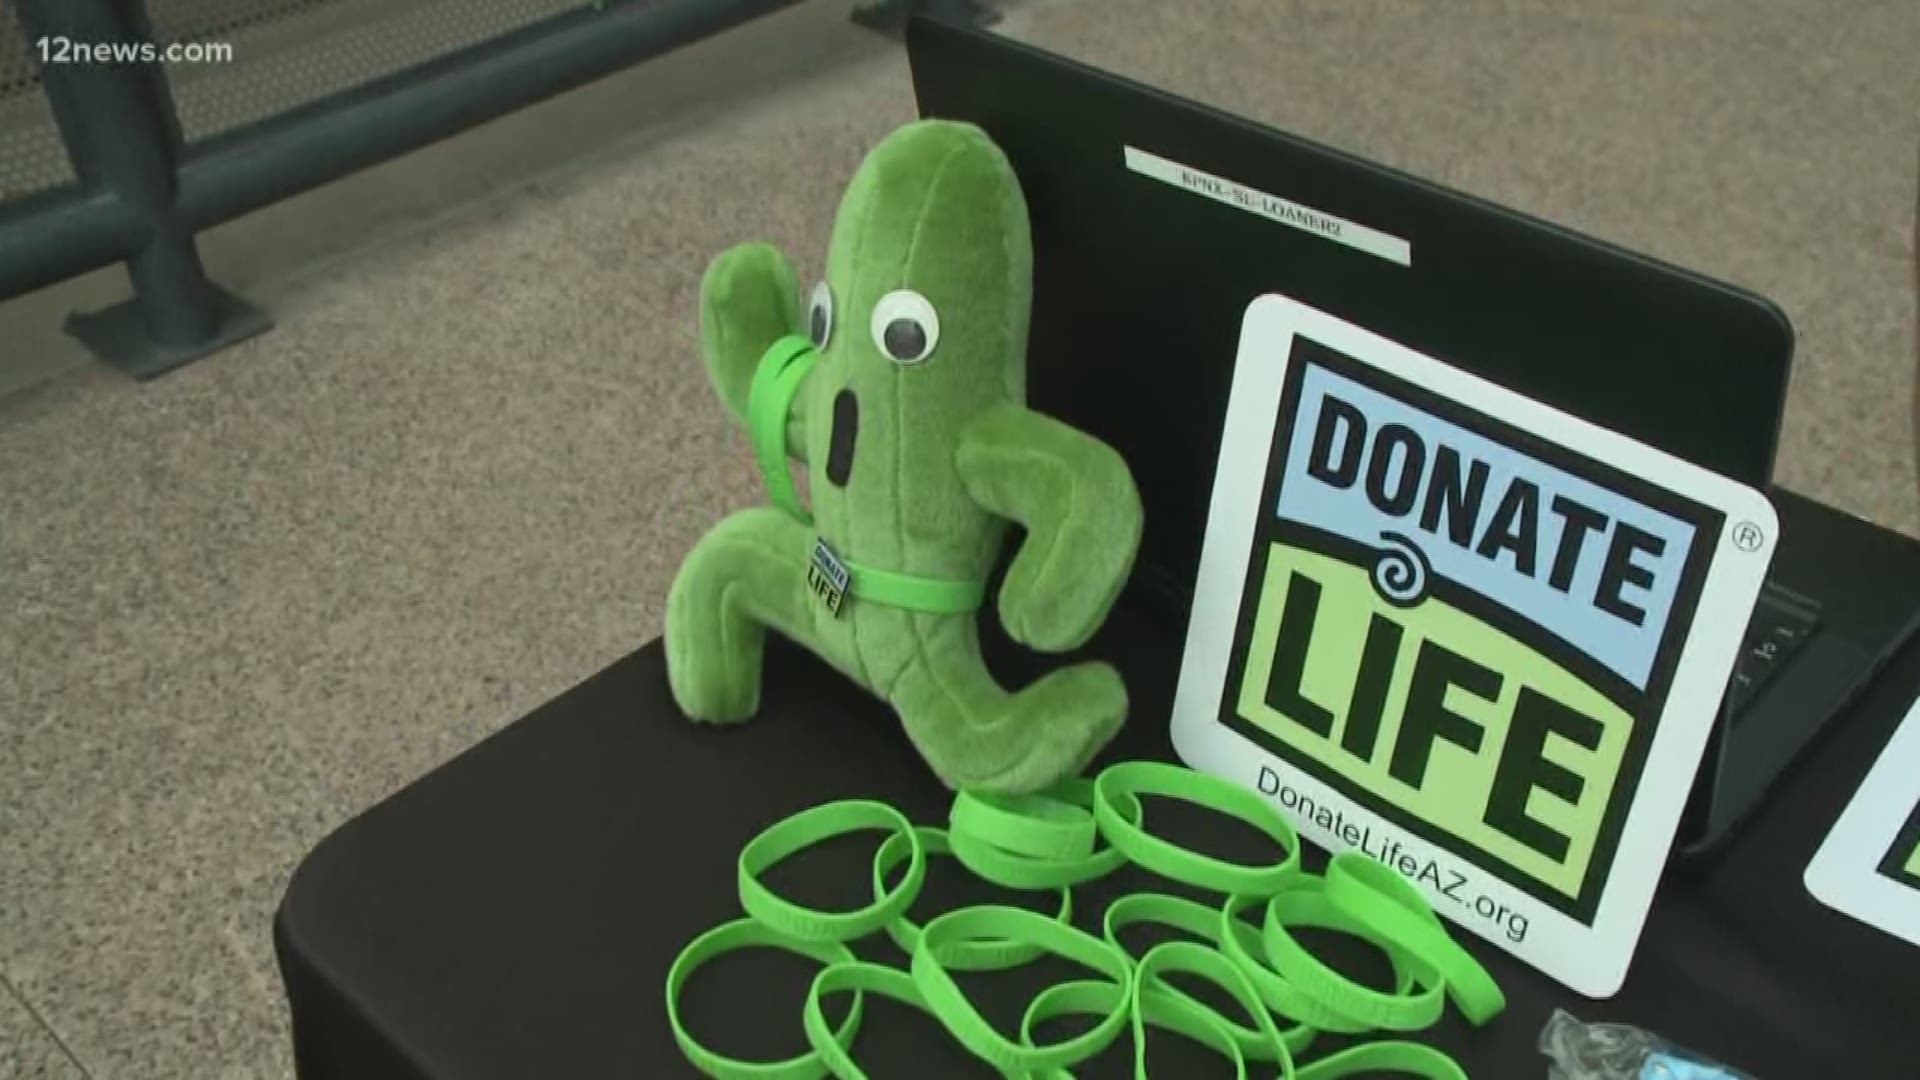 Thousands of people are on organ donor registry lists waiting for life-saving transplants. 12 News is holding a drive for people to sign up to become an organ donor. If you can't make it down to our plaza you can go to www.donatelifeaz.org to register.